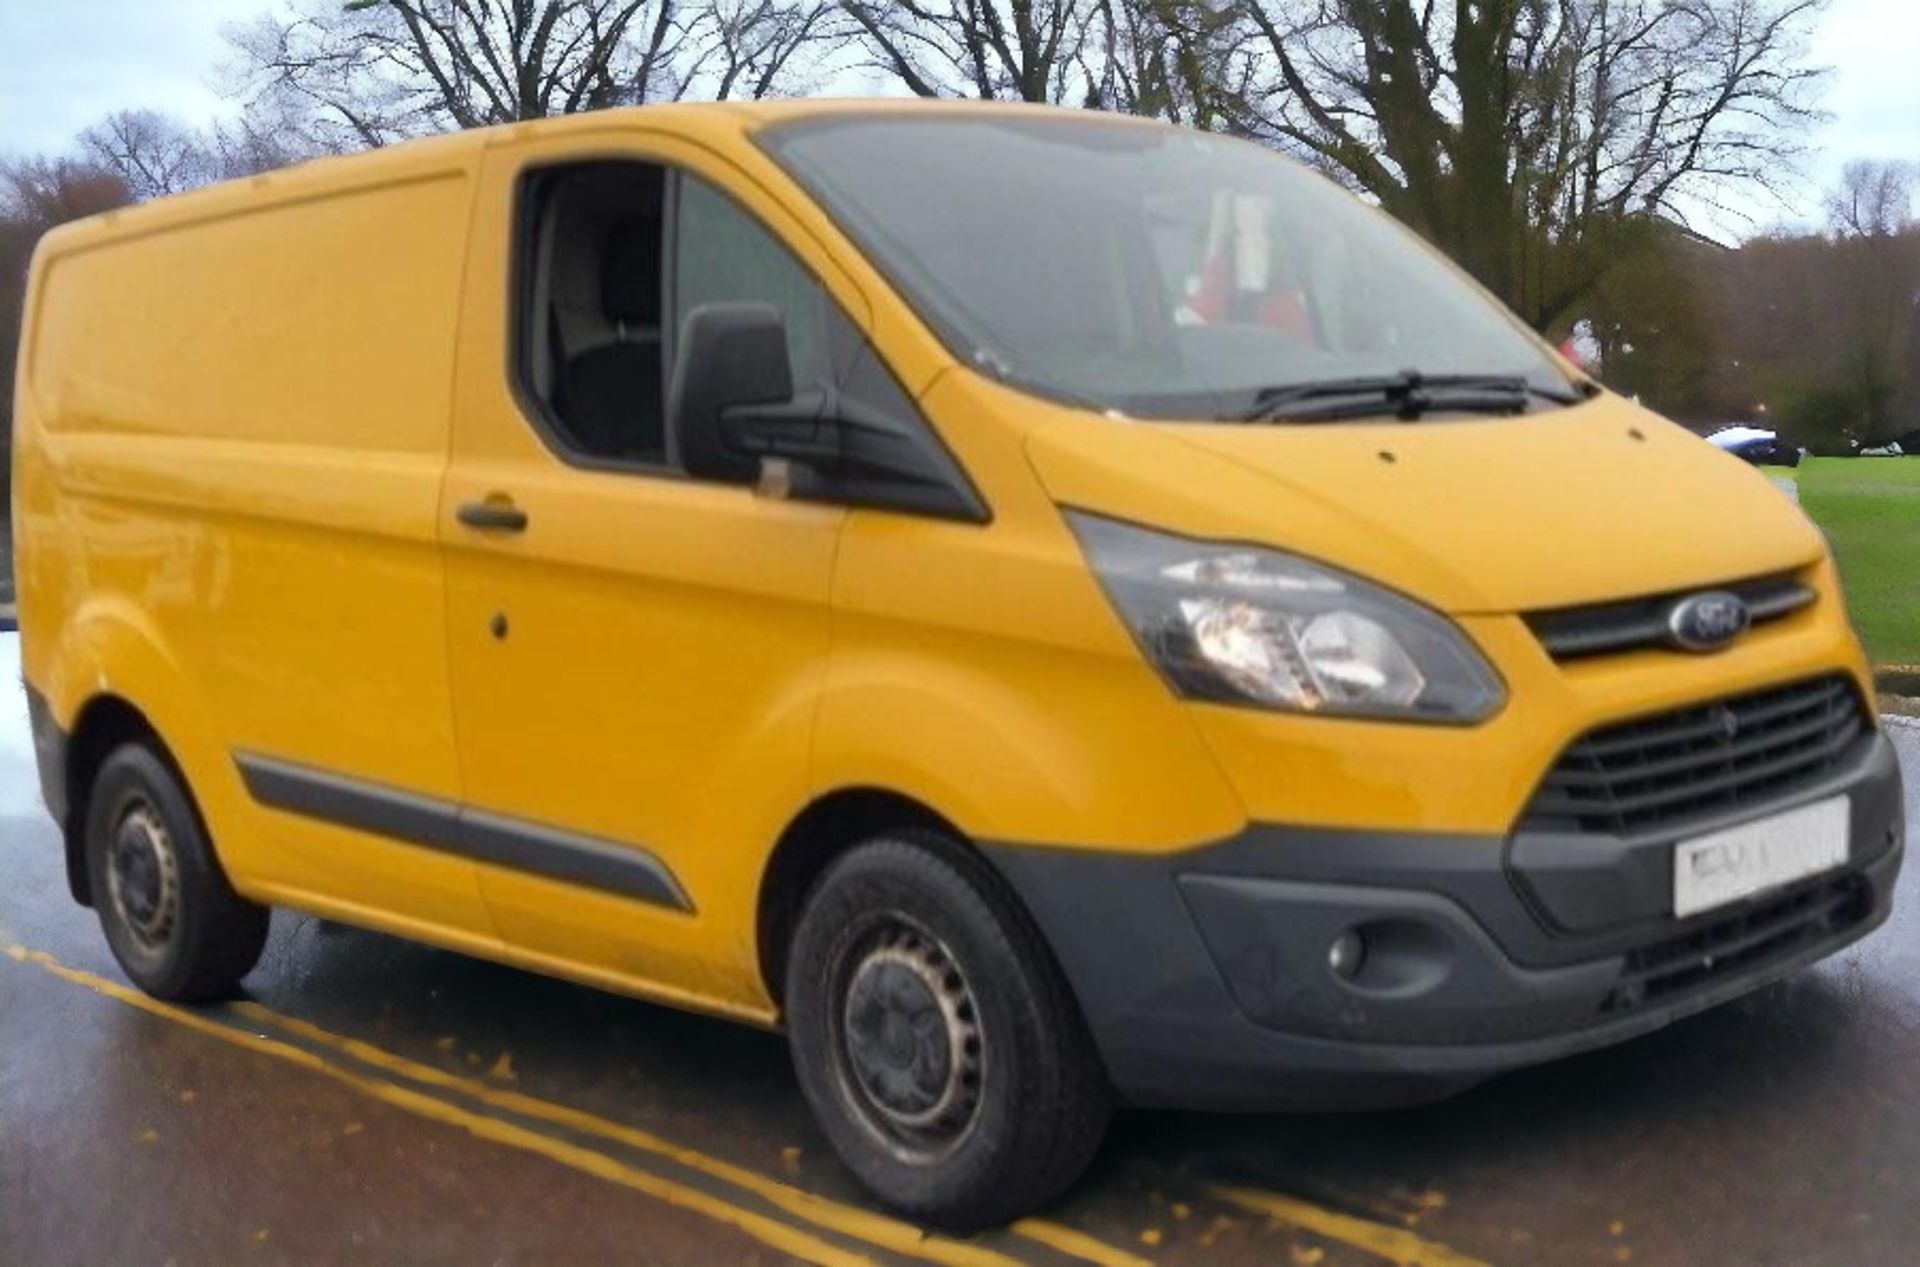 2015 FORD TRANSIT CUSTOM PANEL VAN - EXCEPTIONALLY MAINTAINED WORKHORSE